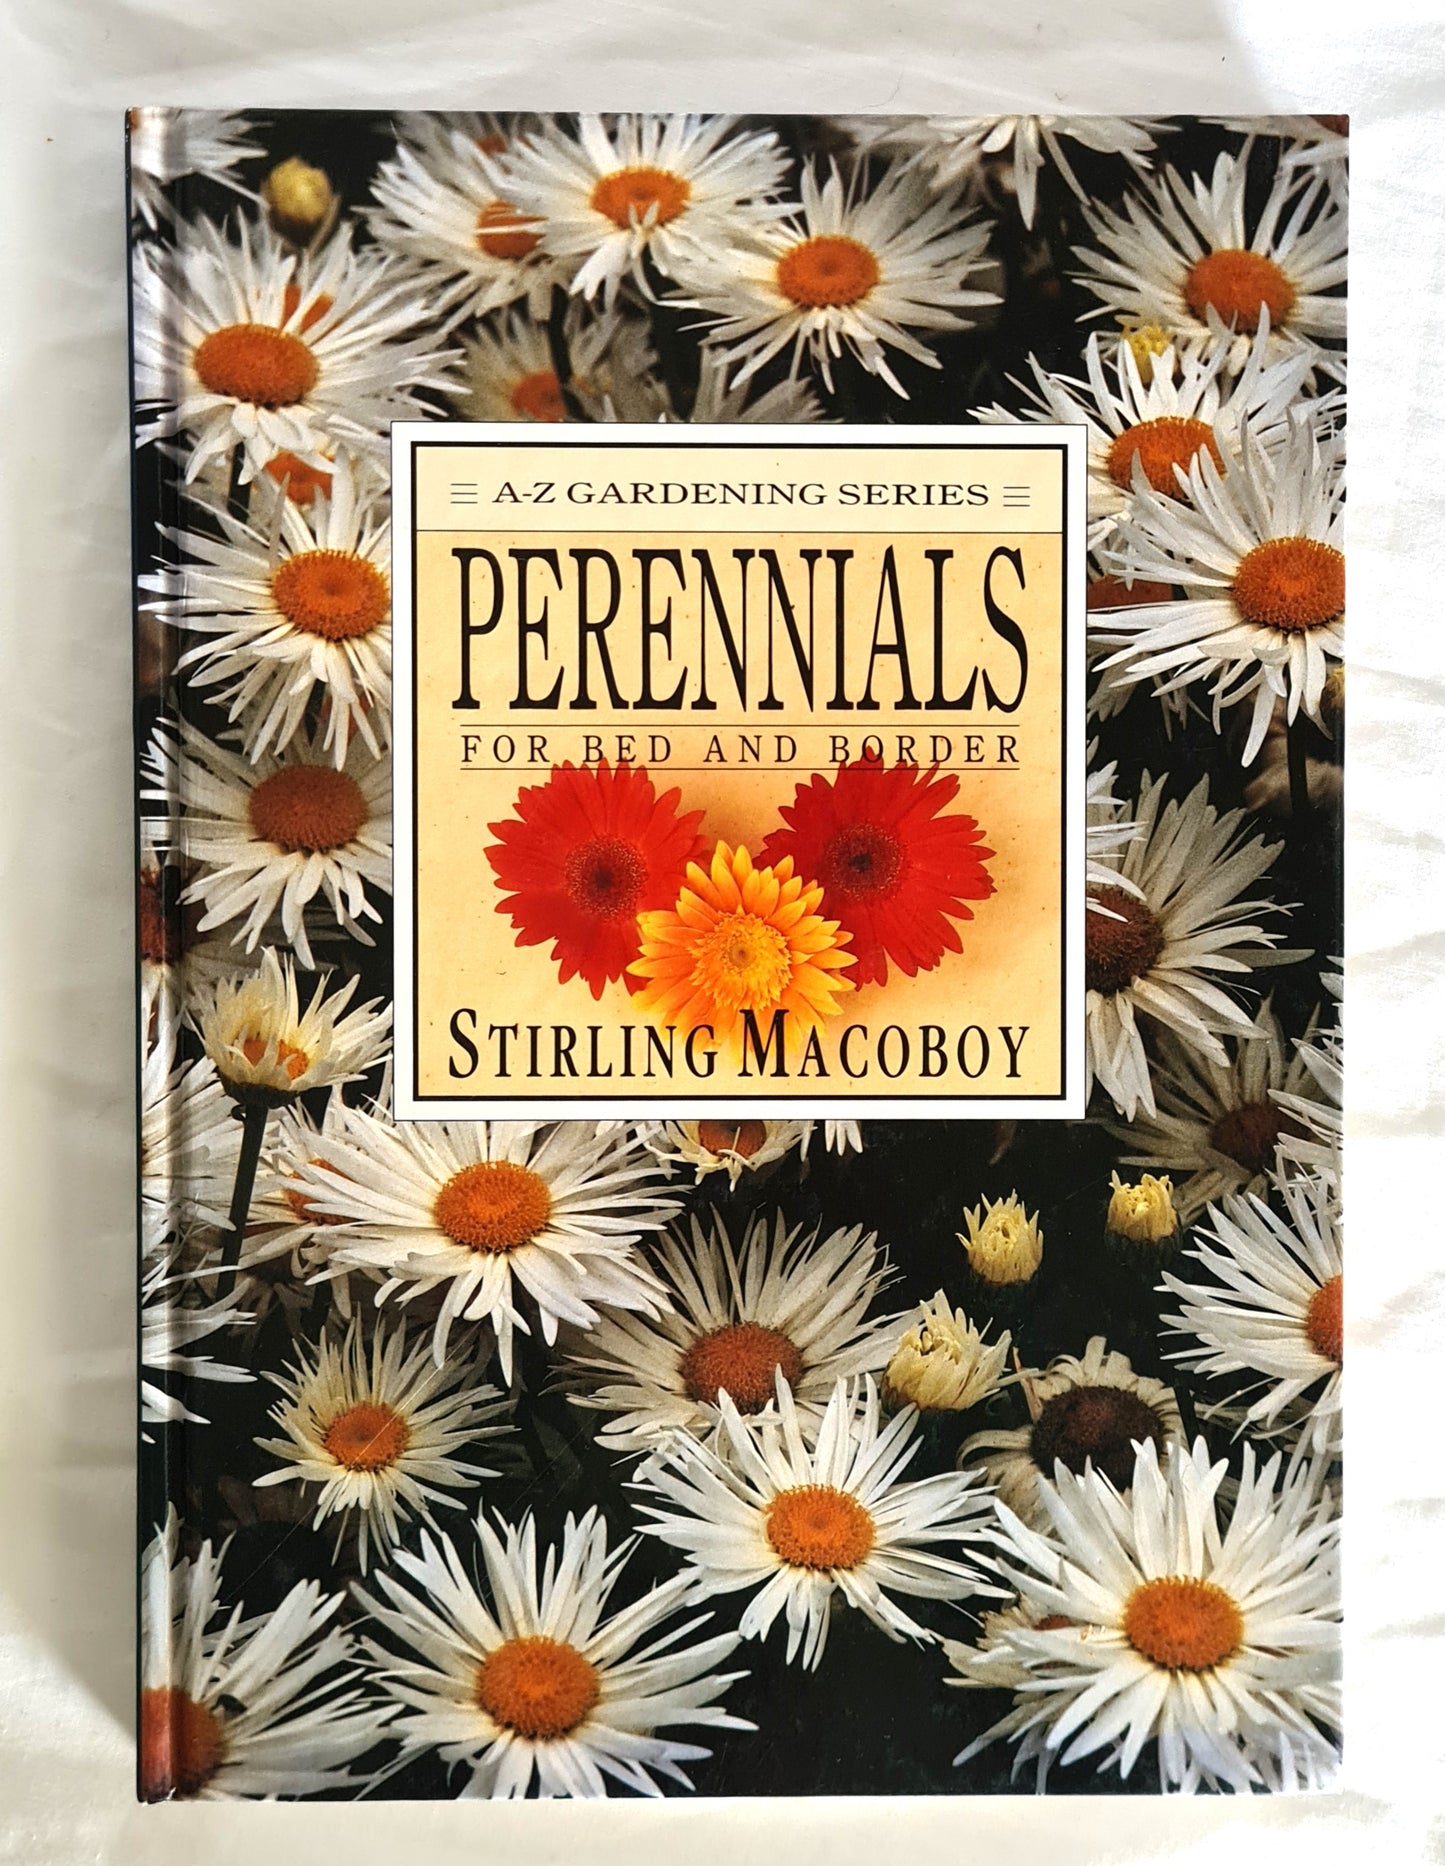 Perennials  For Bed and Border  by Stirling Macoboy  A-Z Gardening Series